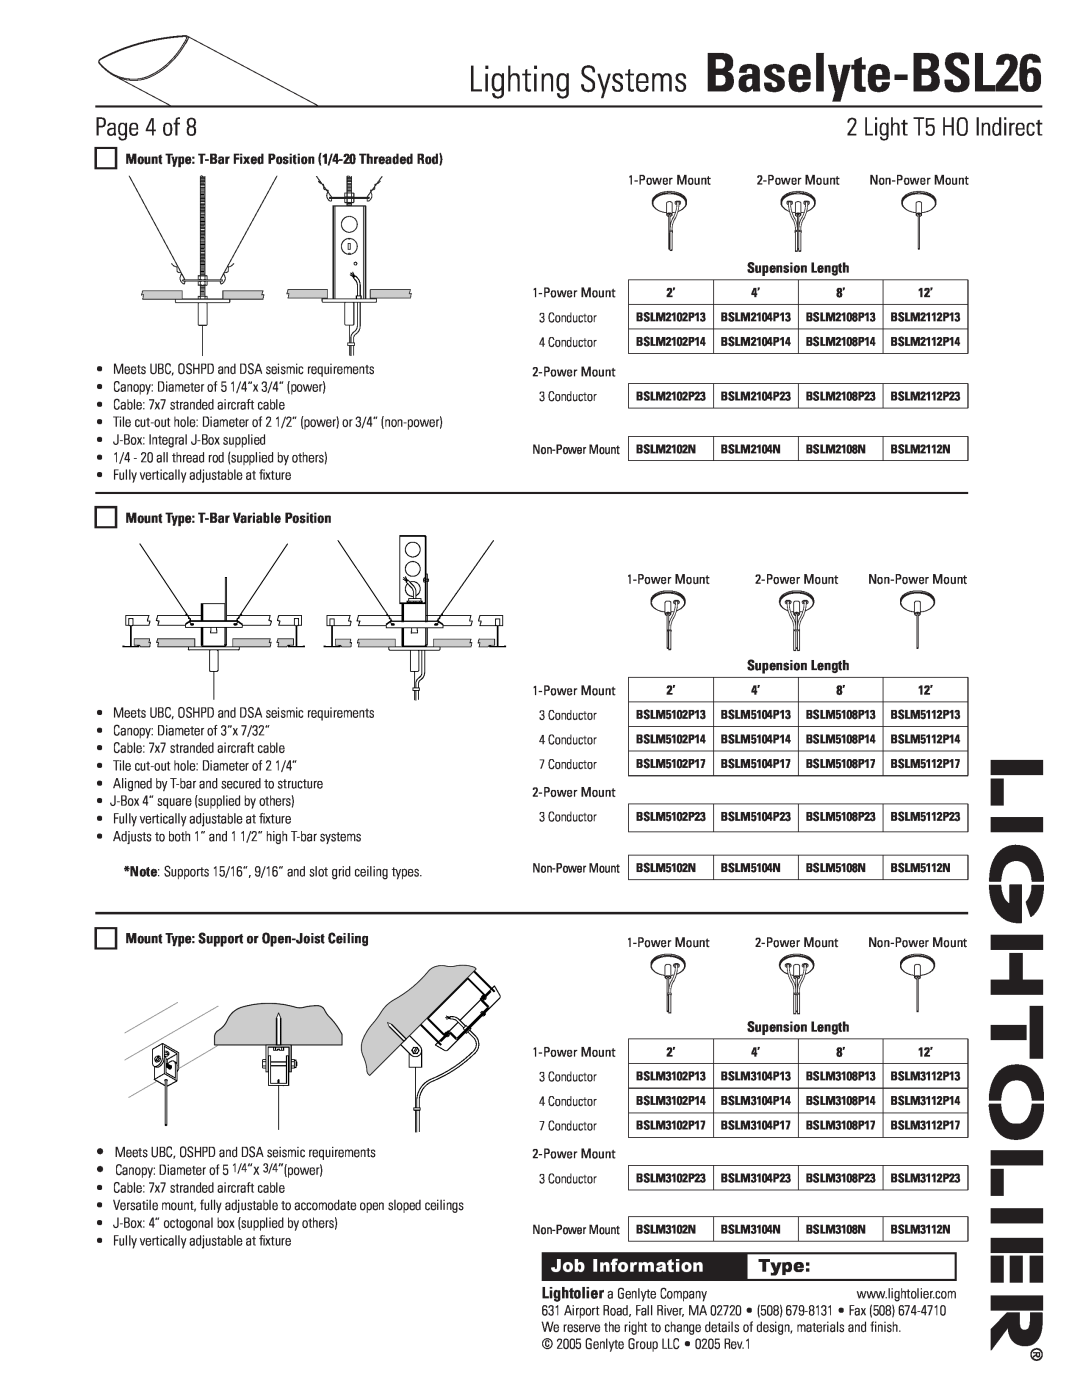 Lightolier Baselyte-BSL26 Page of, Mount Type: T-BarVariable Position, Mount Type Support or Open-JoistCeiling 